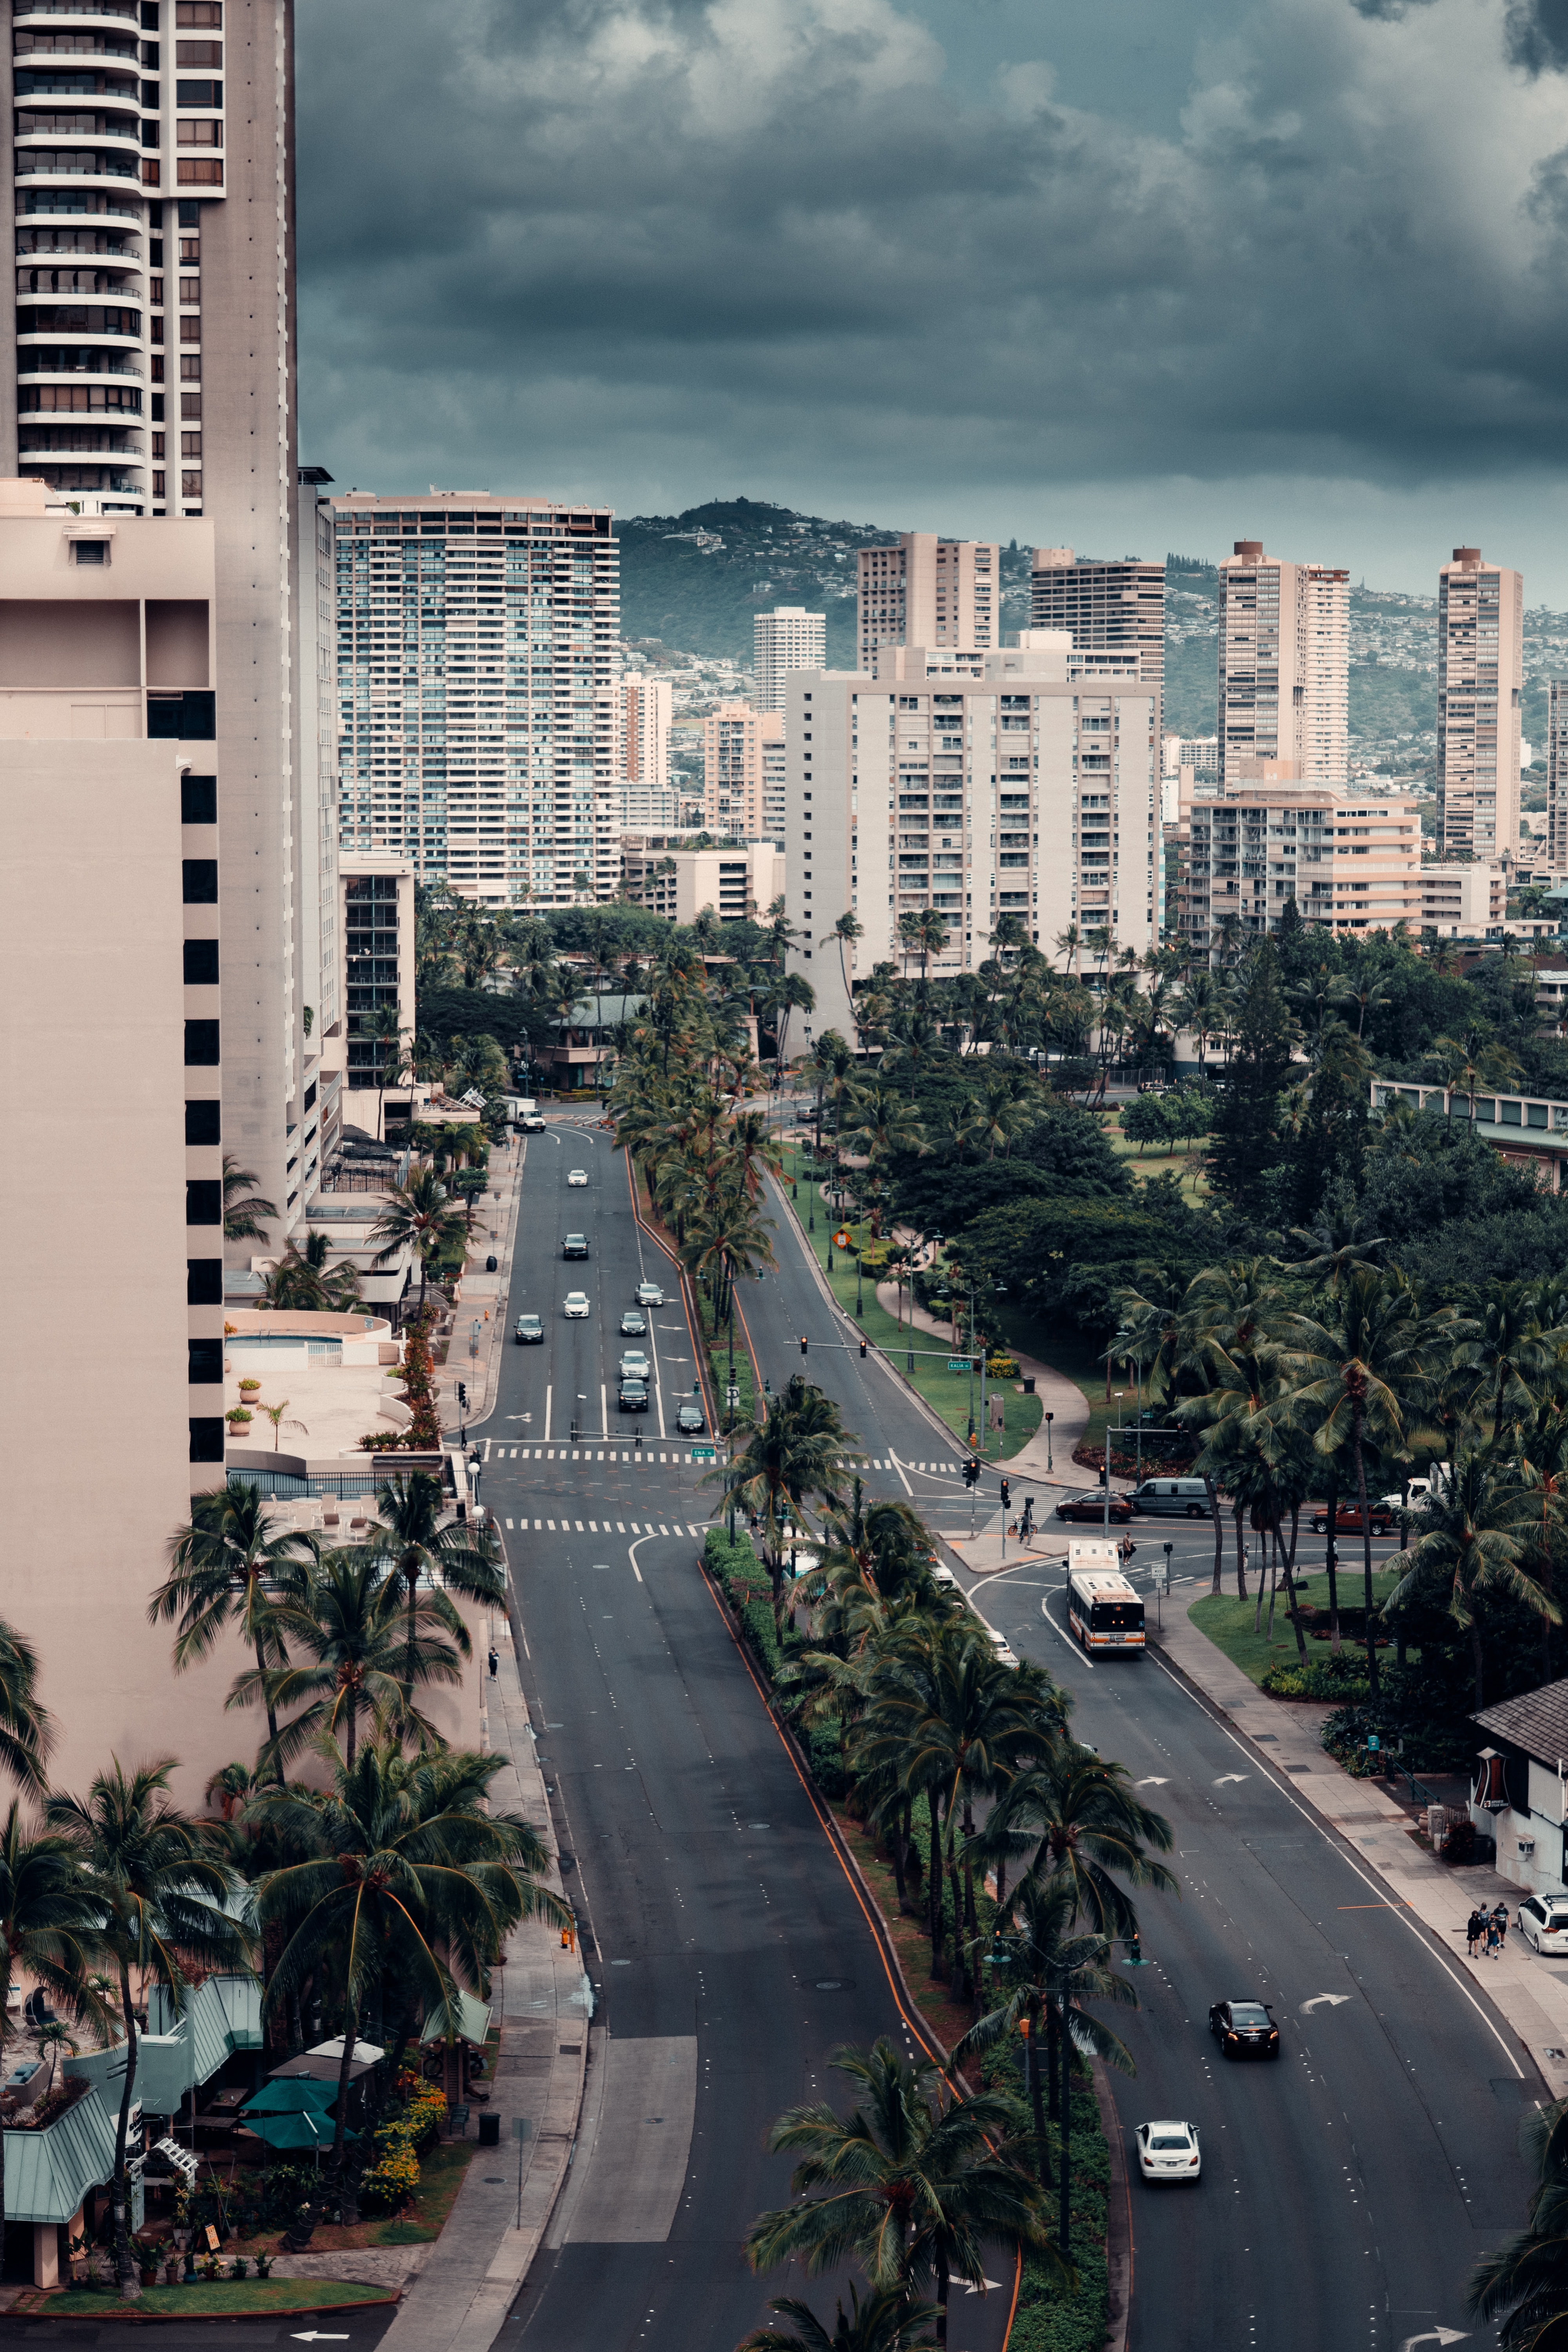 PC Wallpapers cities, palms, city, building, view from above, road